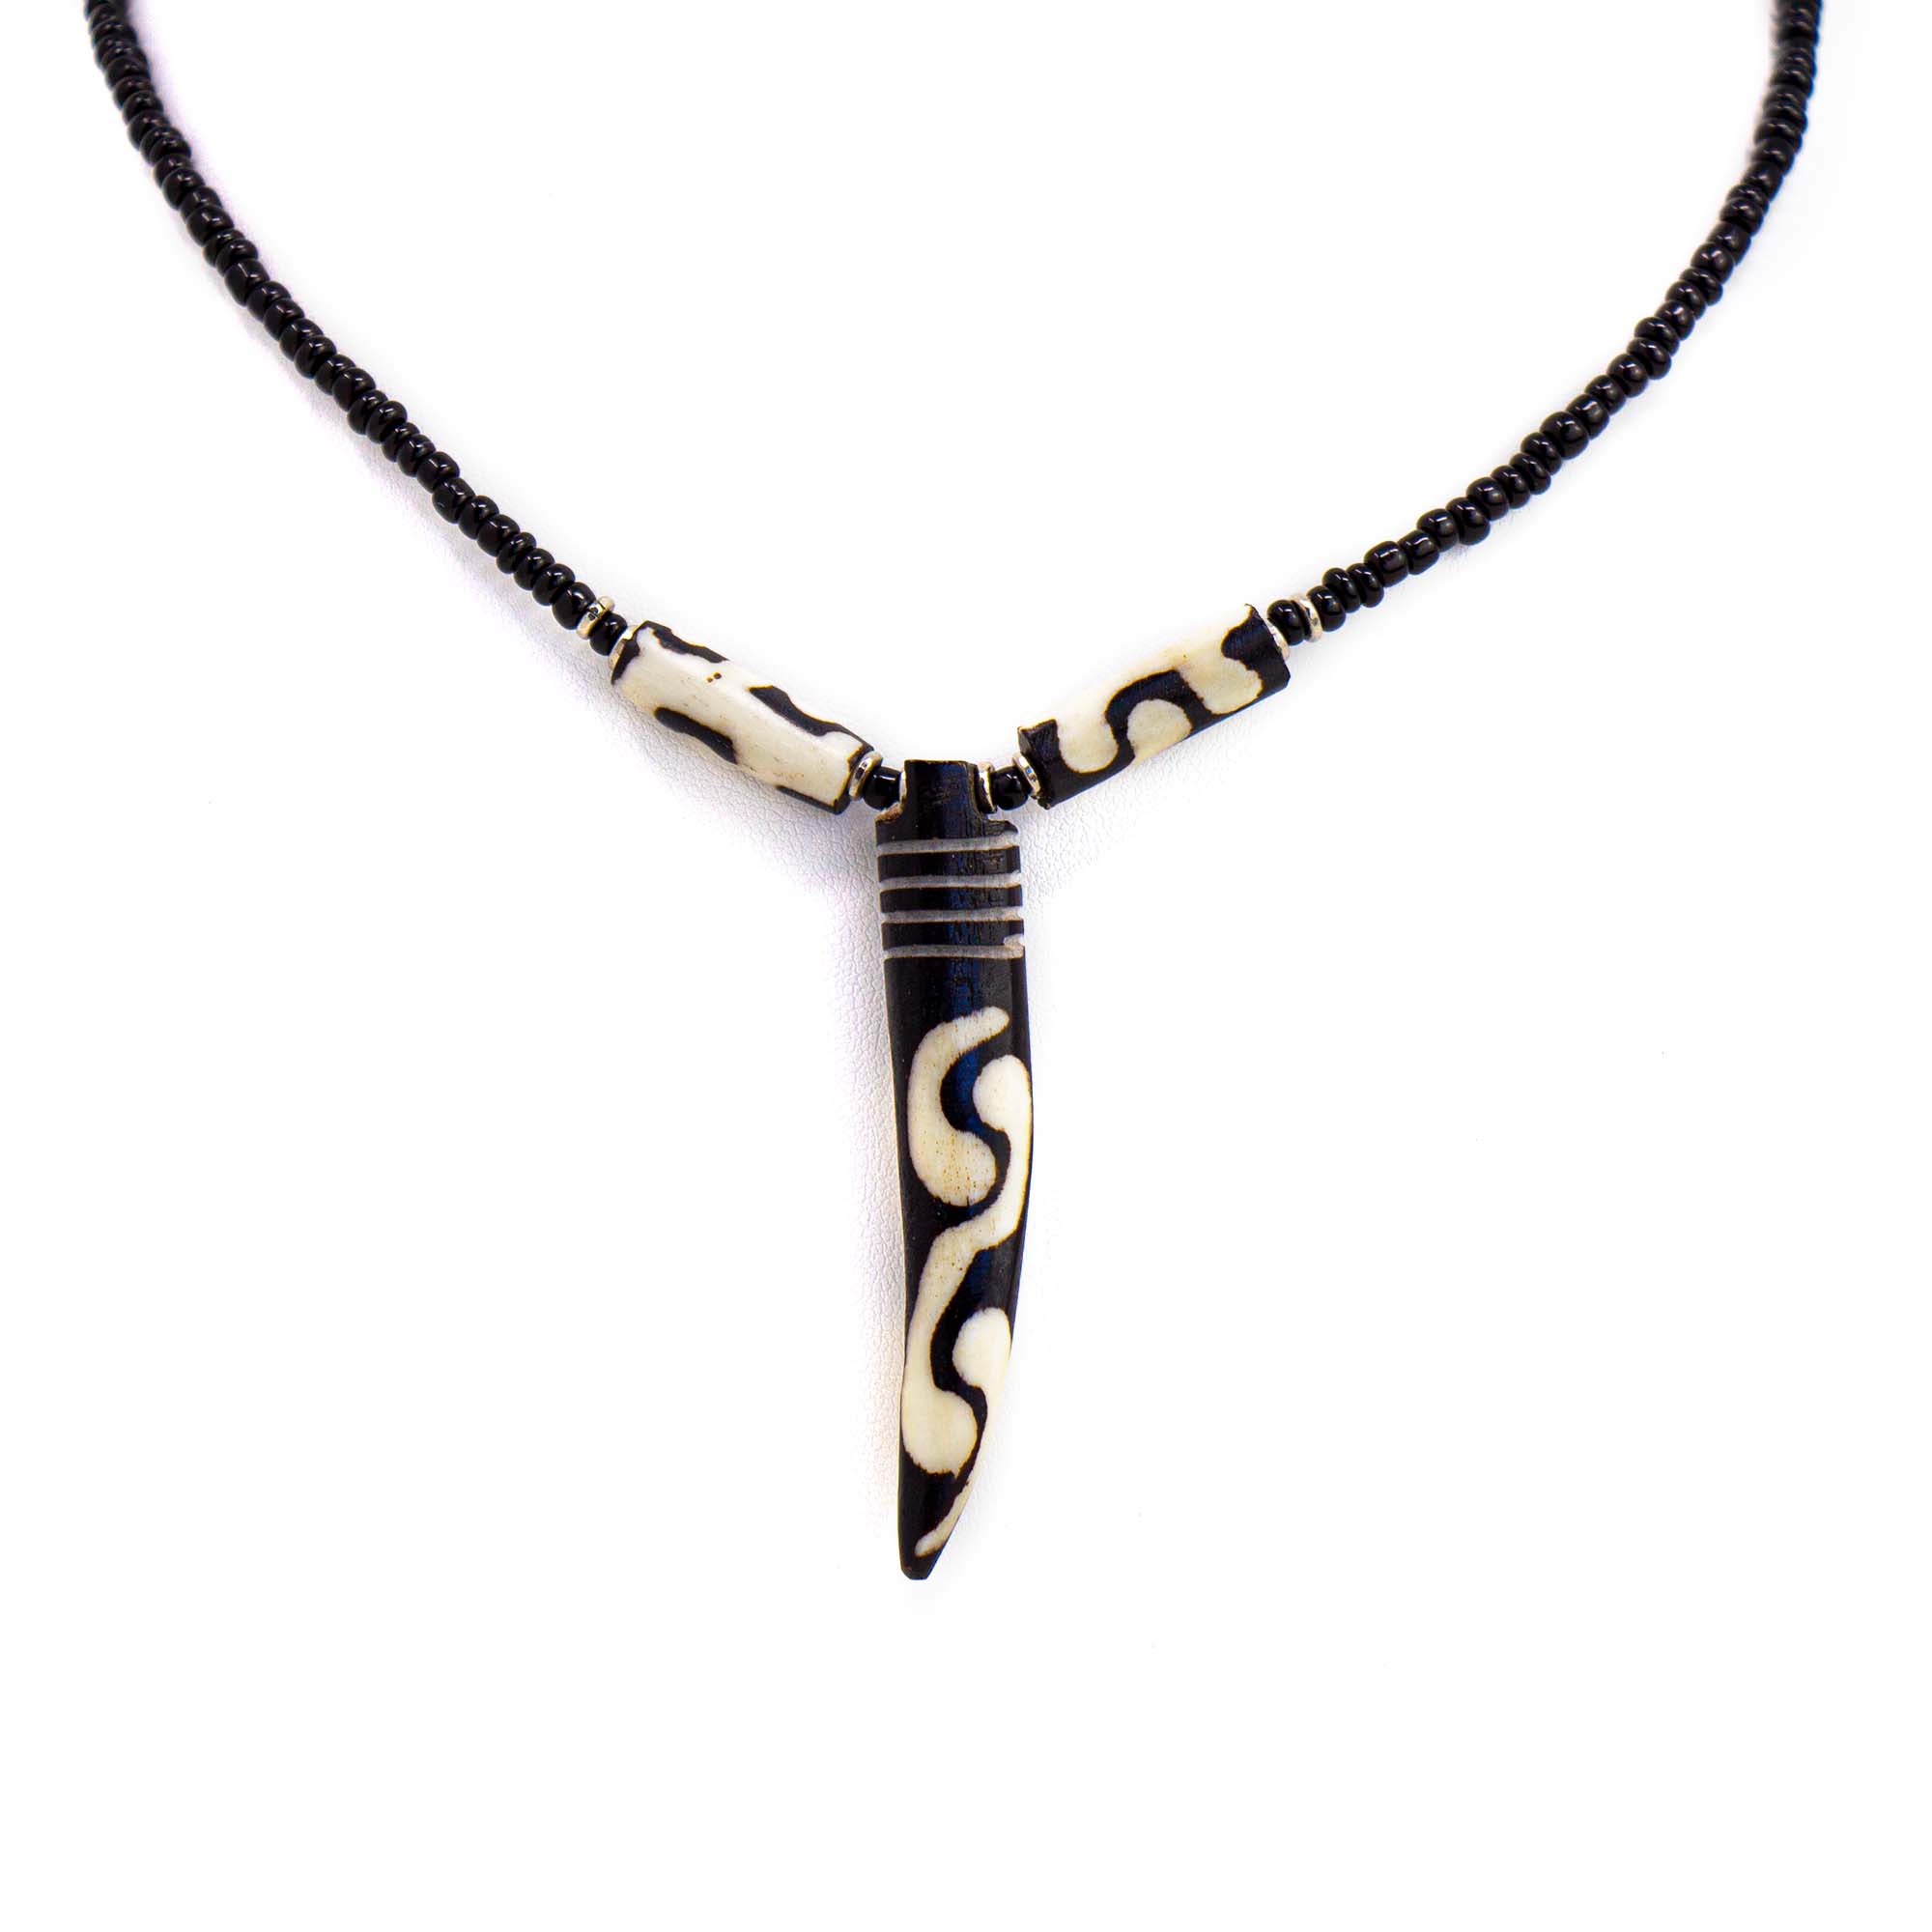 Bone Tooth Necklace on Leather Chain with Brass Closure- Batik Design